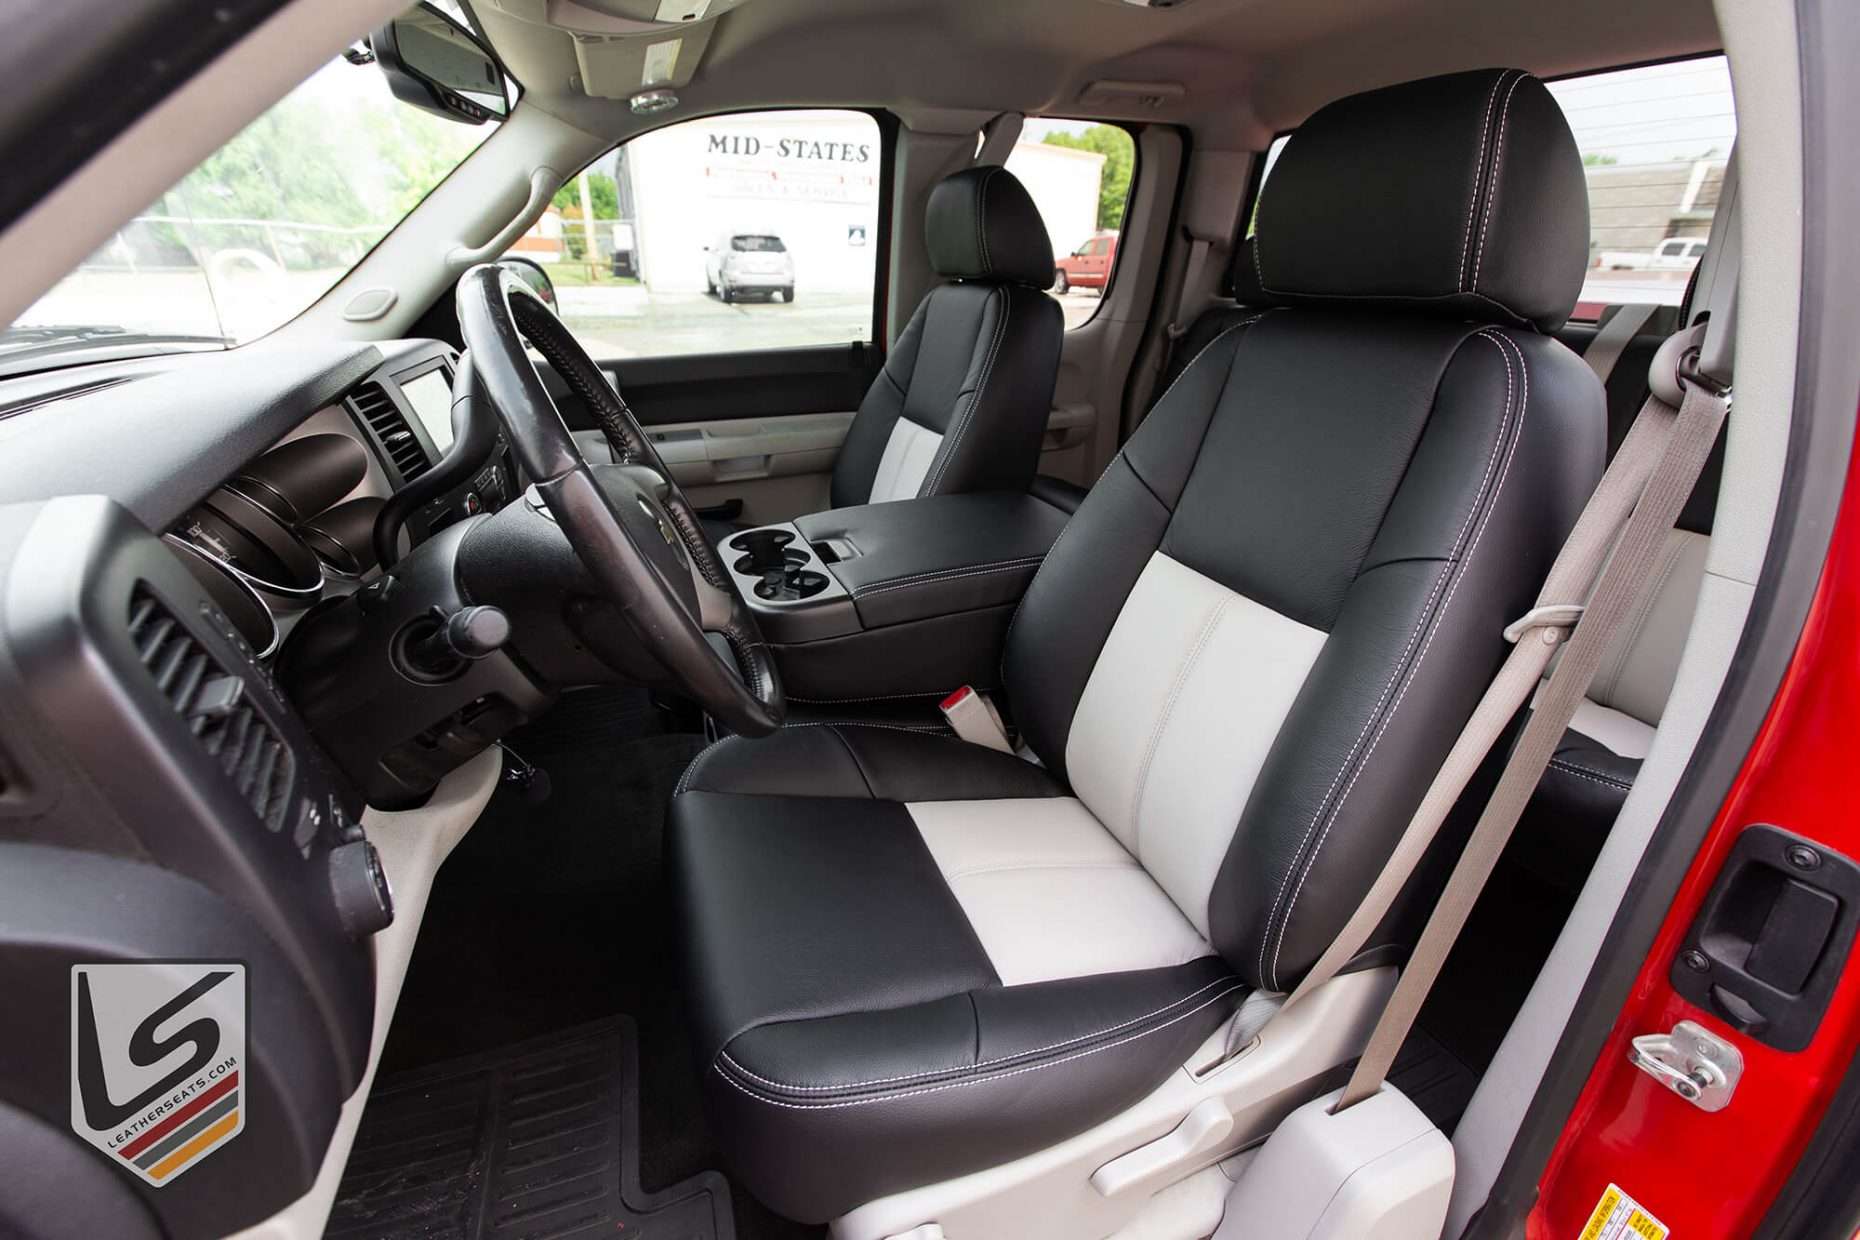 2007-2013 Chevy Silverado with custom Black and Dove Grey leather seats - Front driver seat